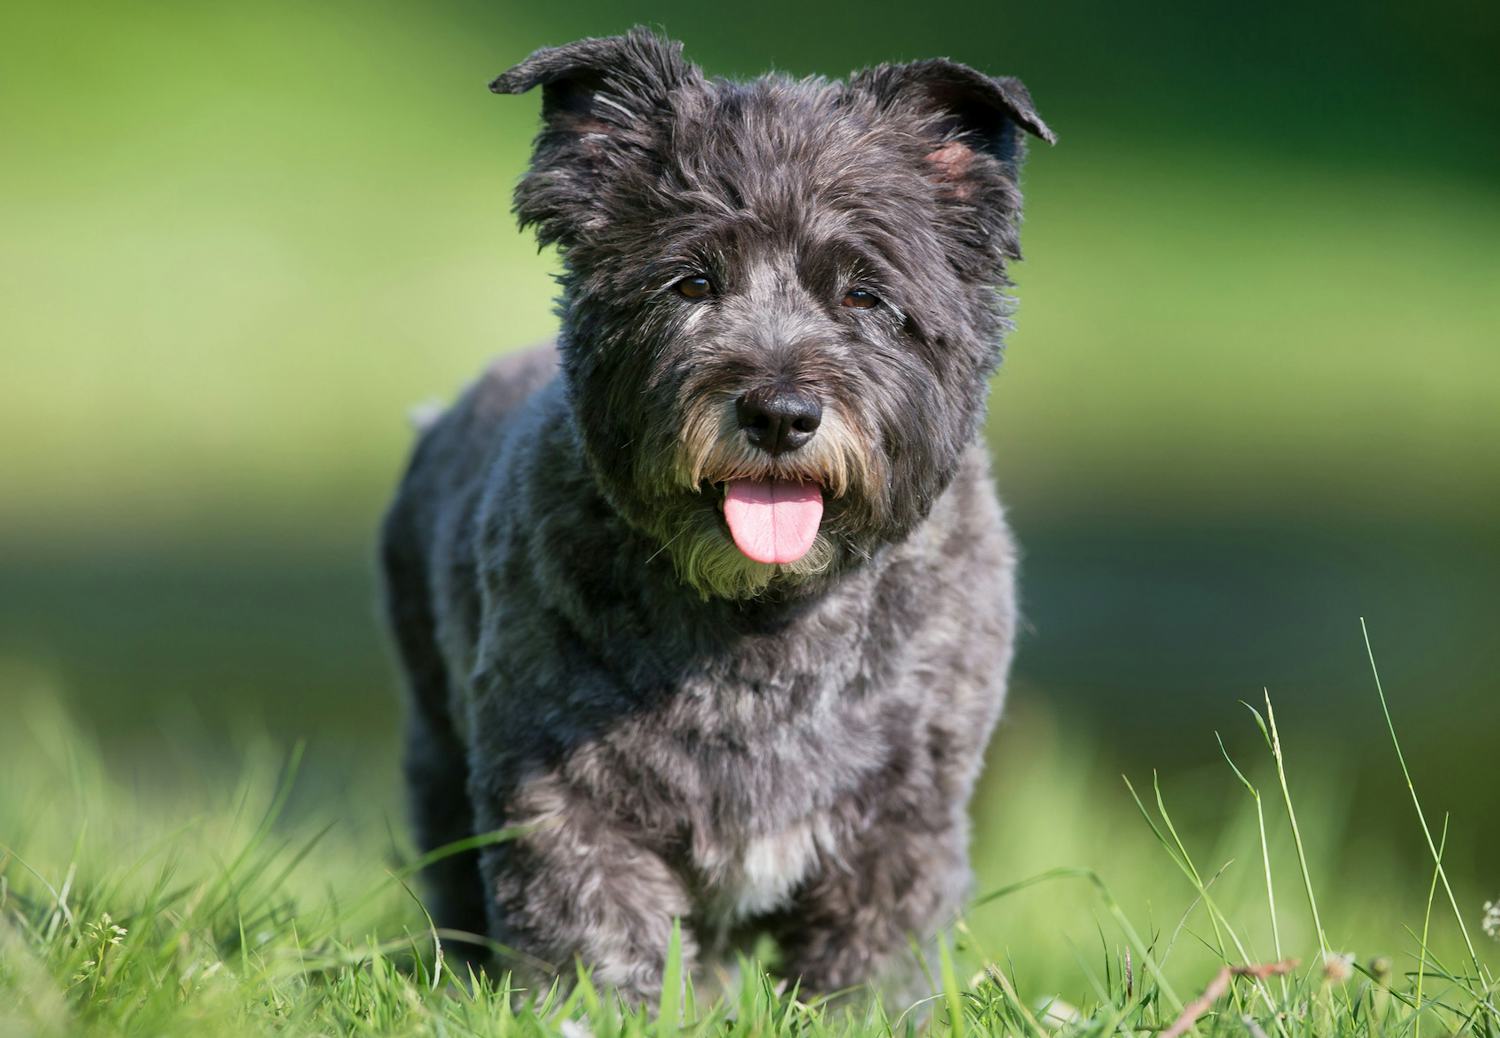 Secondary image of Cairn Terrier dog breed